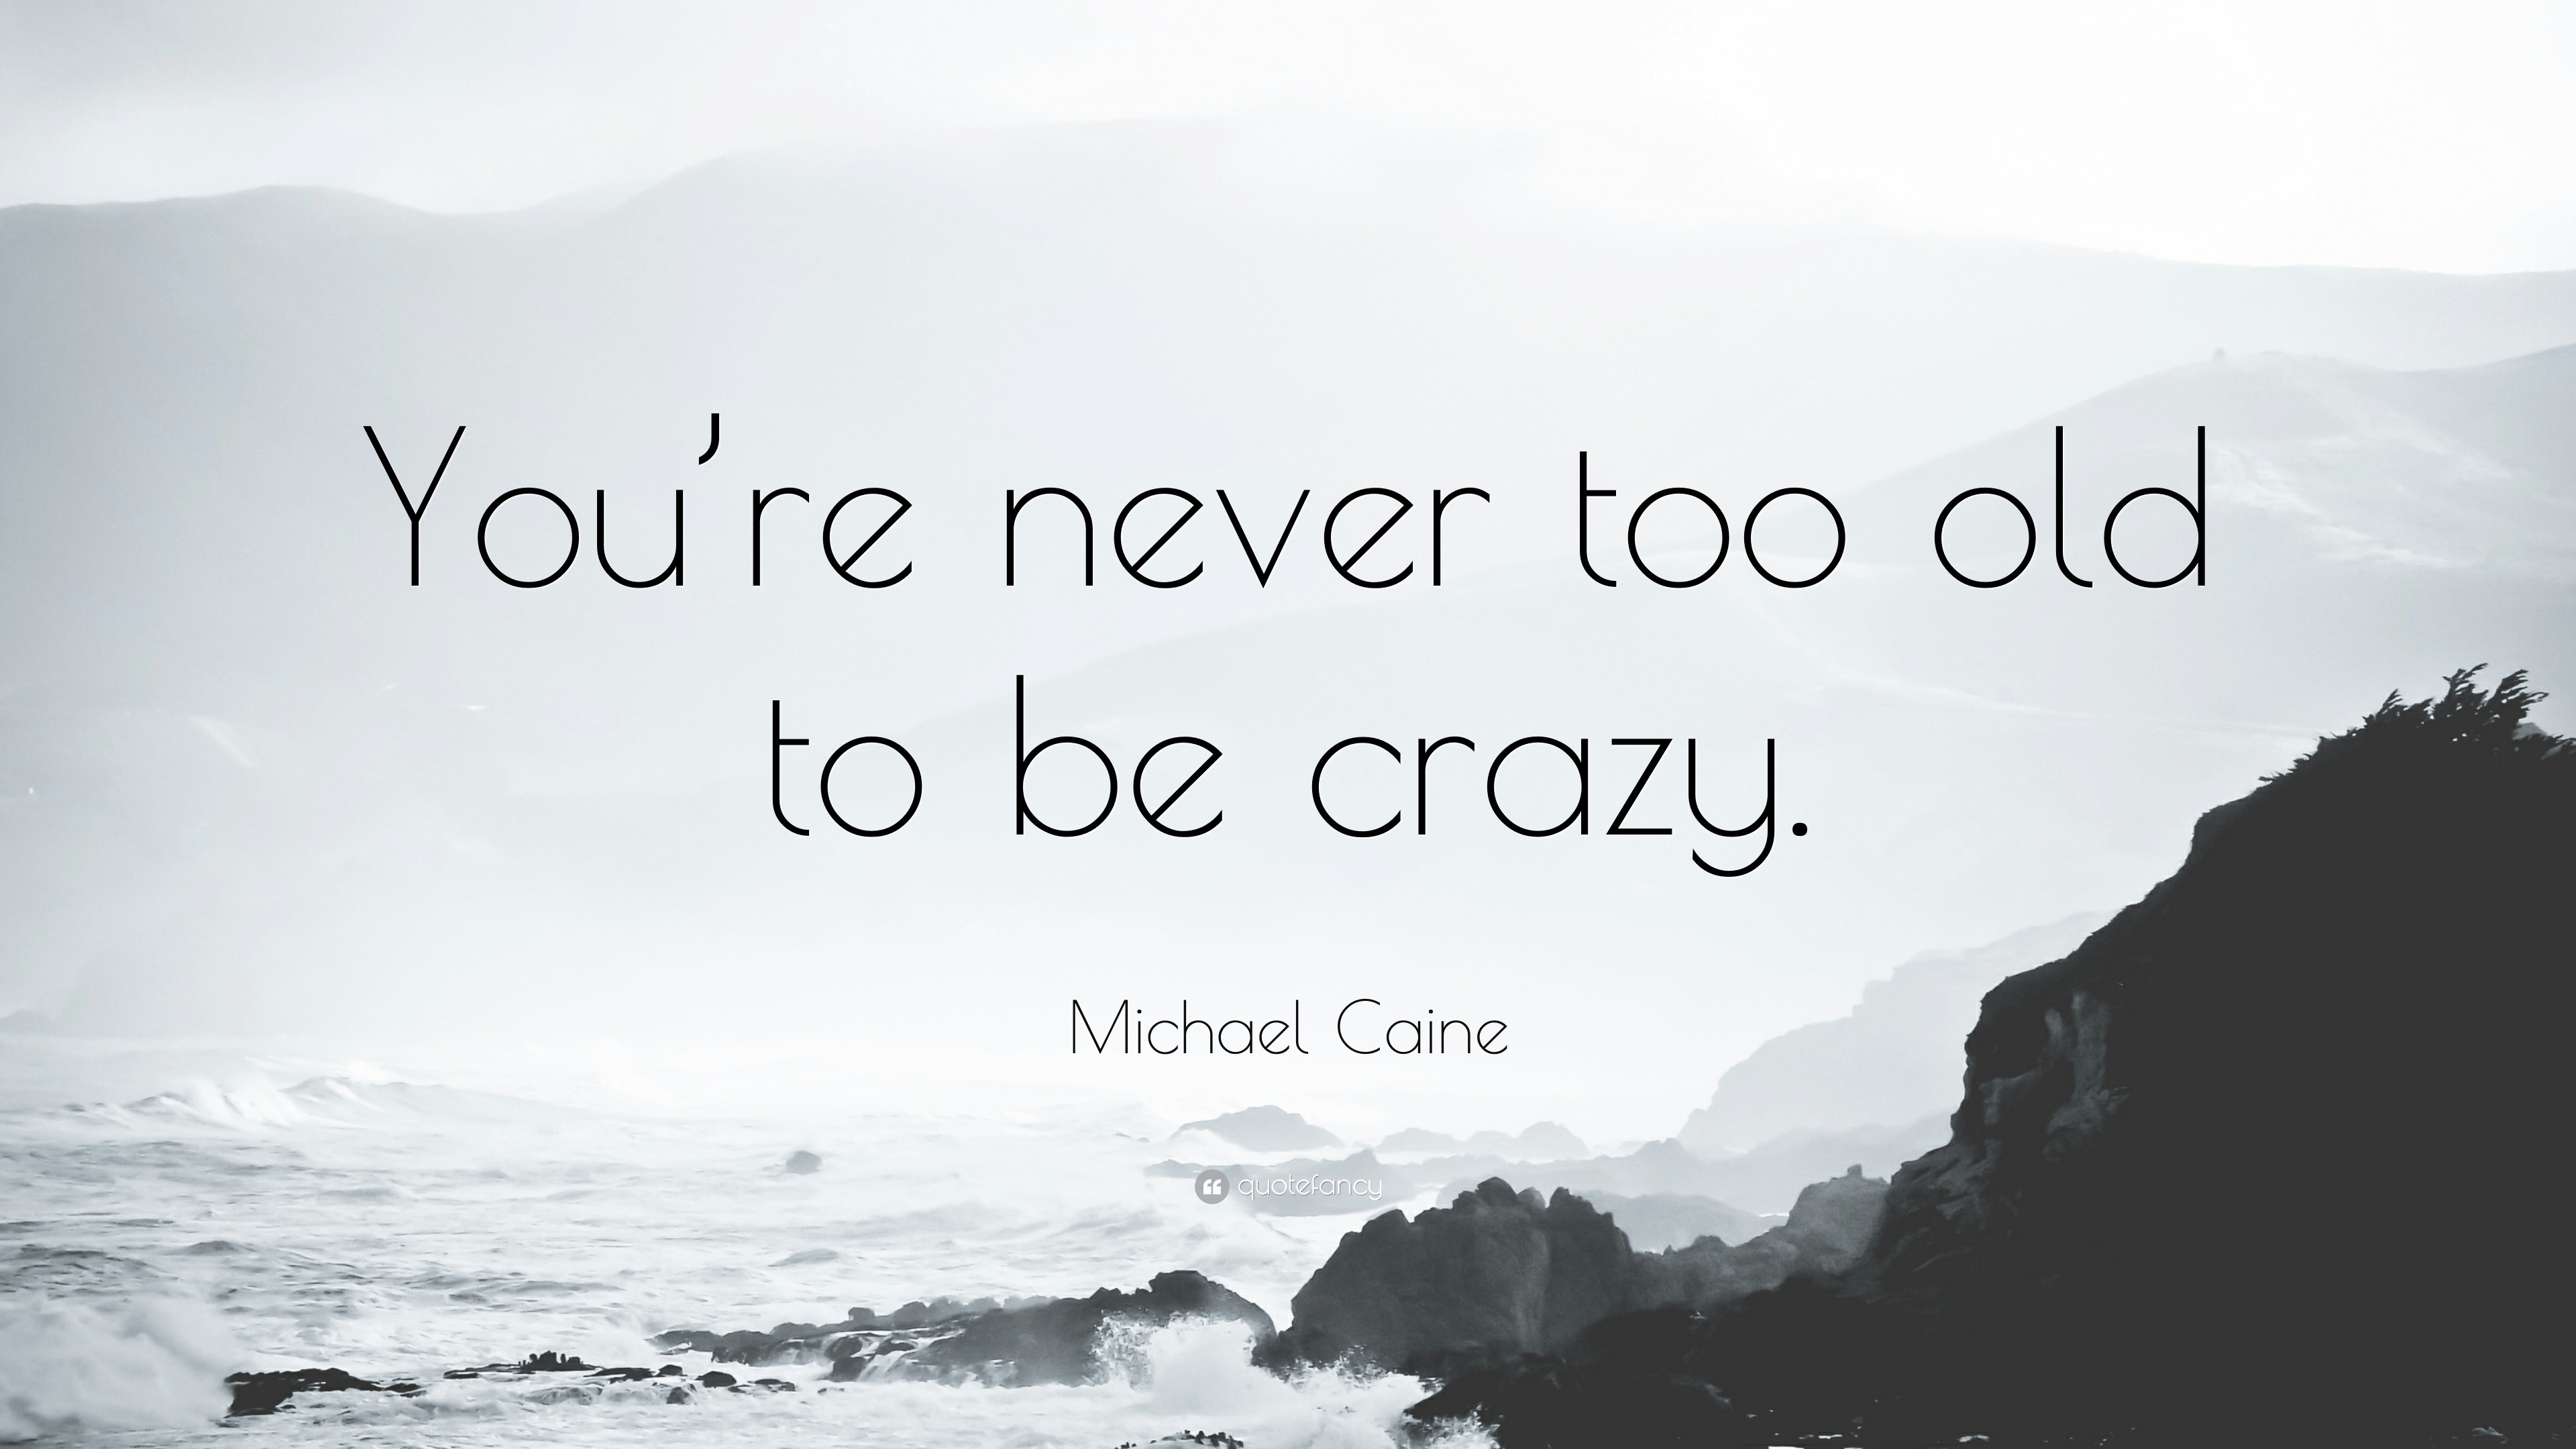 Michael Caine Quote “youre Never Too Old To Be Crazy” 5984